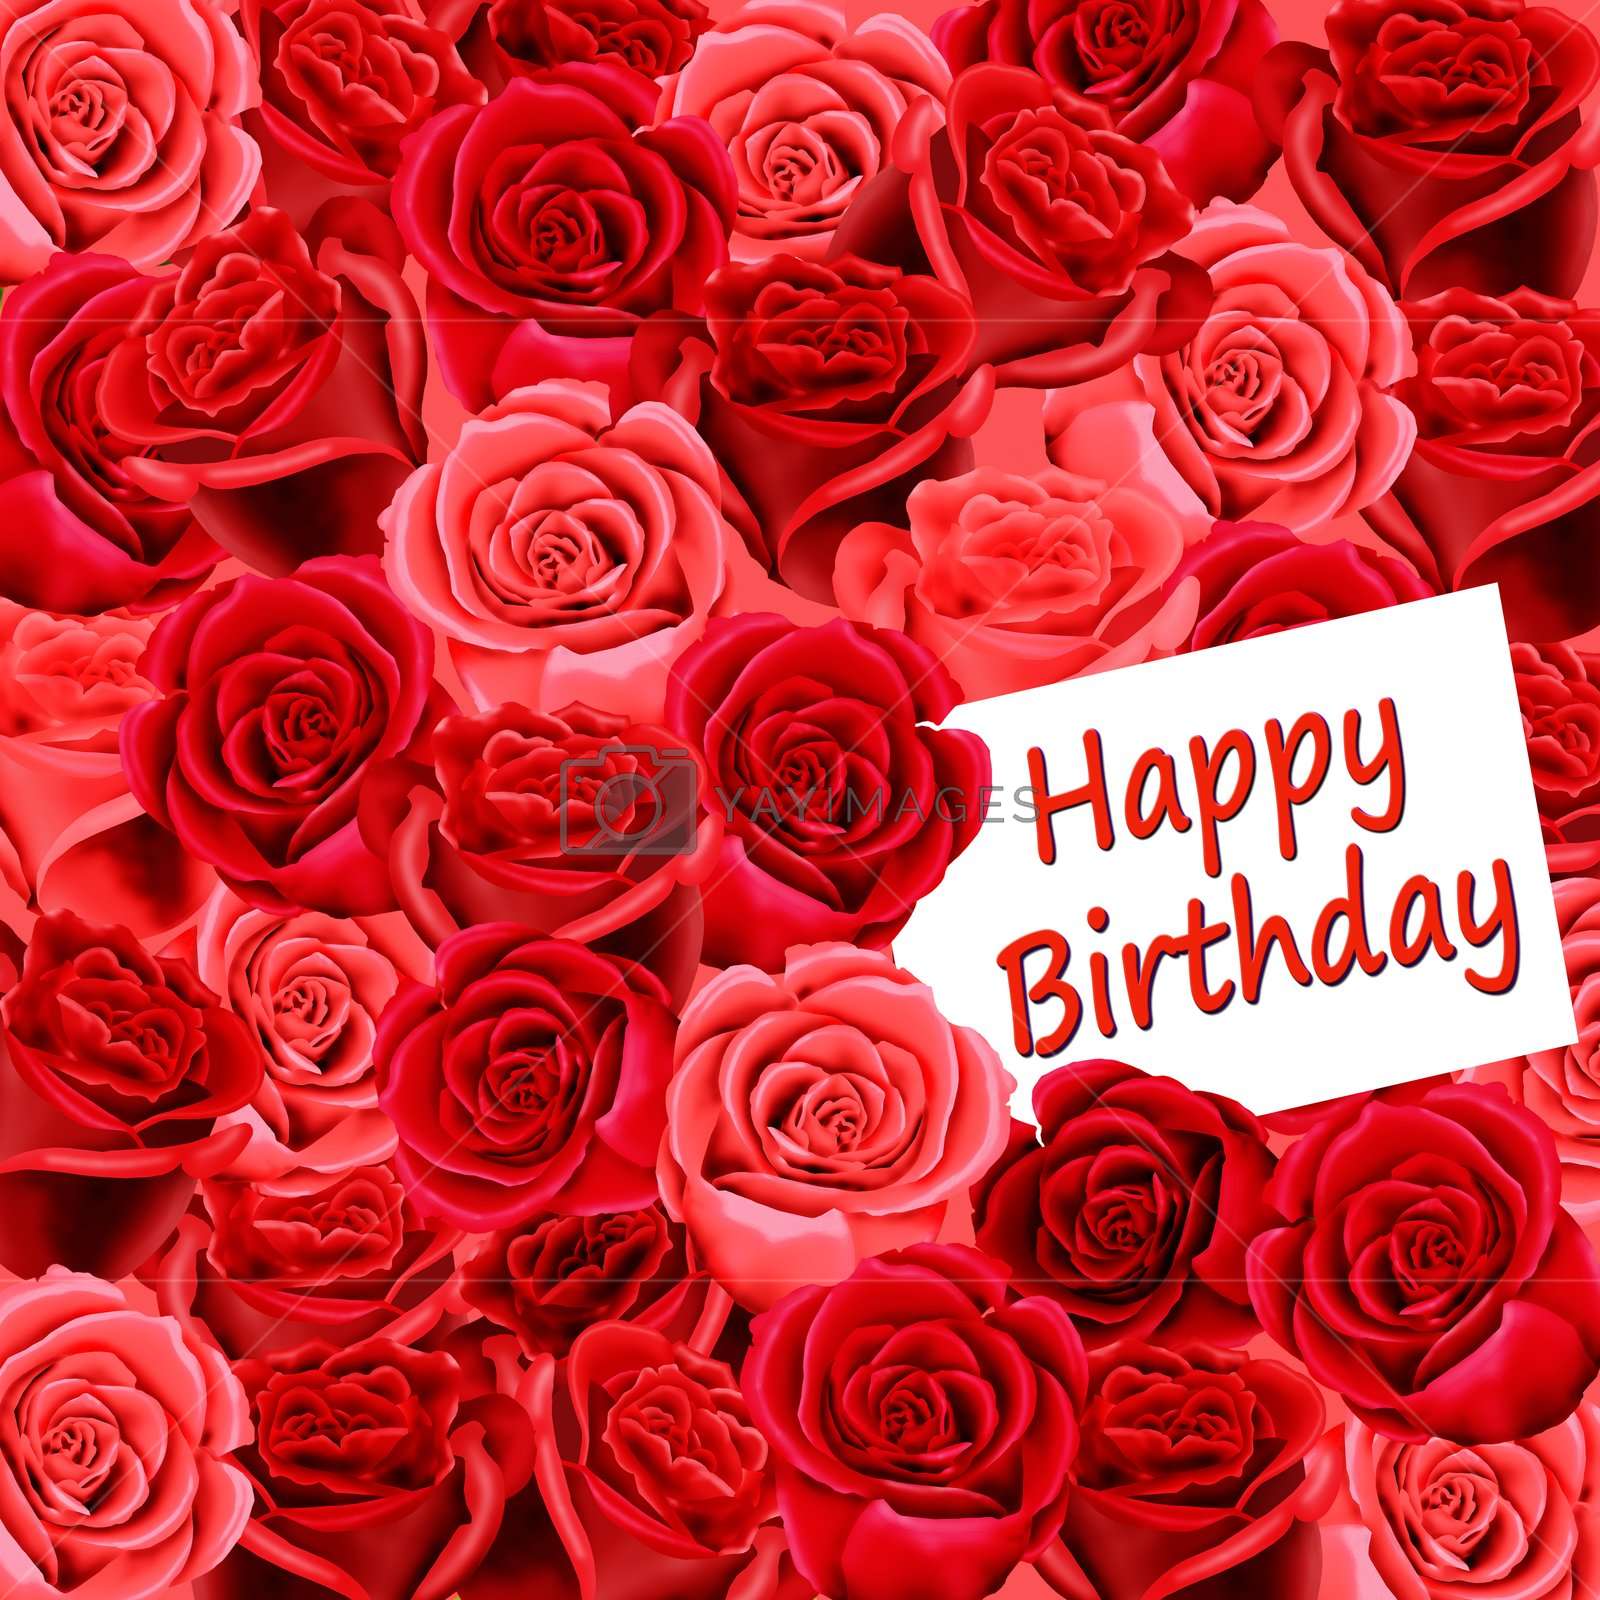 Happy Birthday On Wallpaper Of Red Roses By Acremead - Happy Birthday Flowers Red , HD Wallpaper & Backgrounds